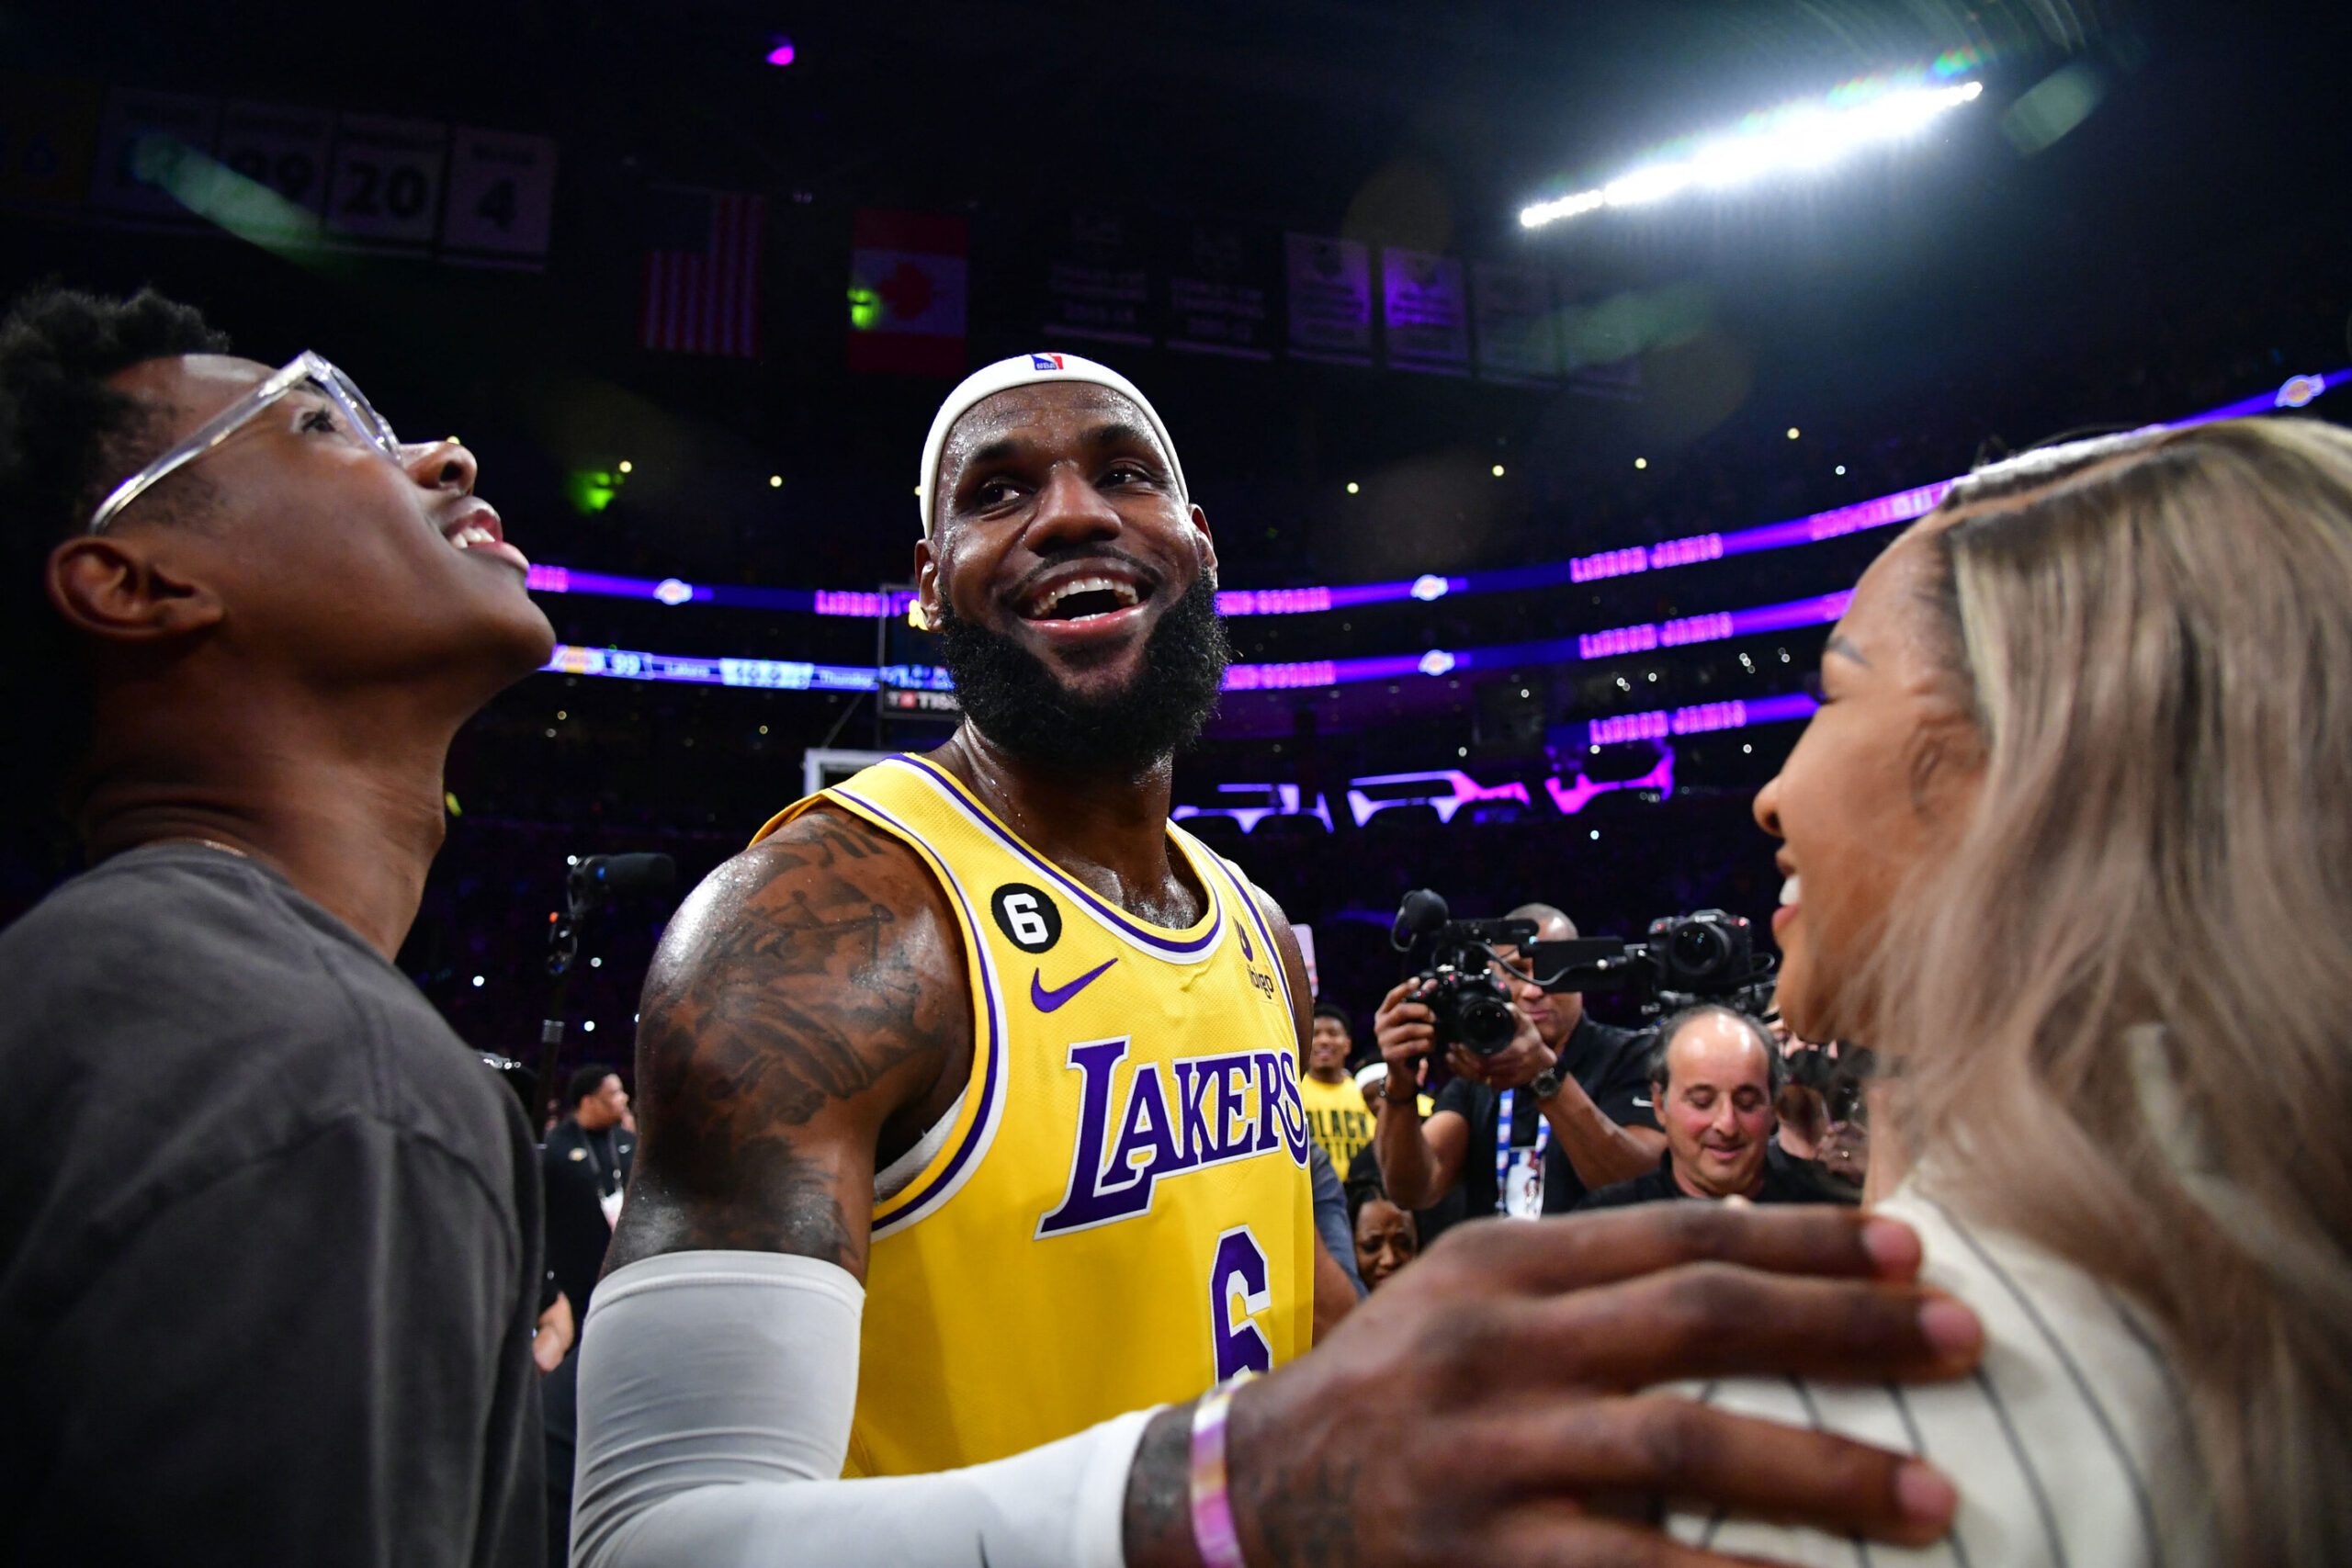 LOOK: Curry, Durant react to LeBron passing Kareem for NBA record